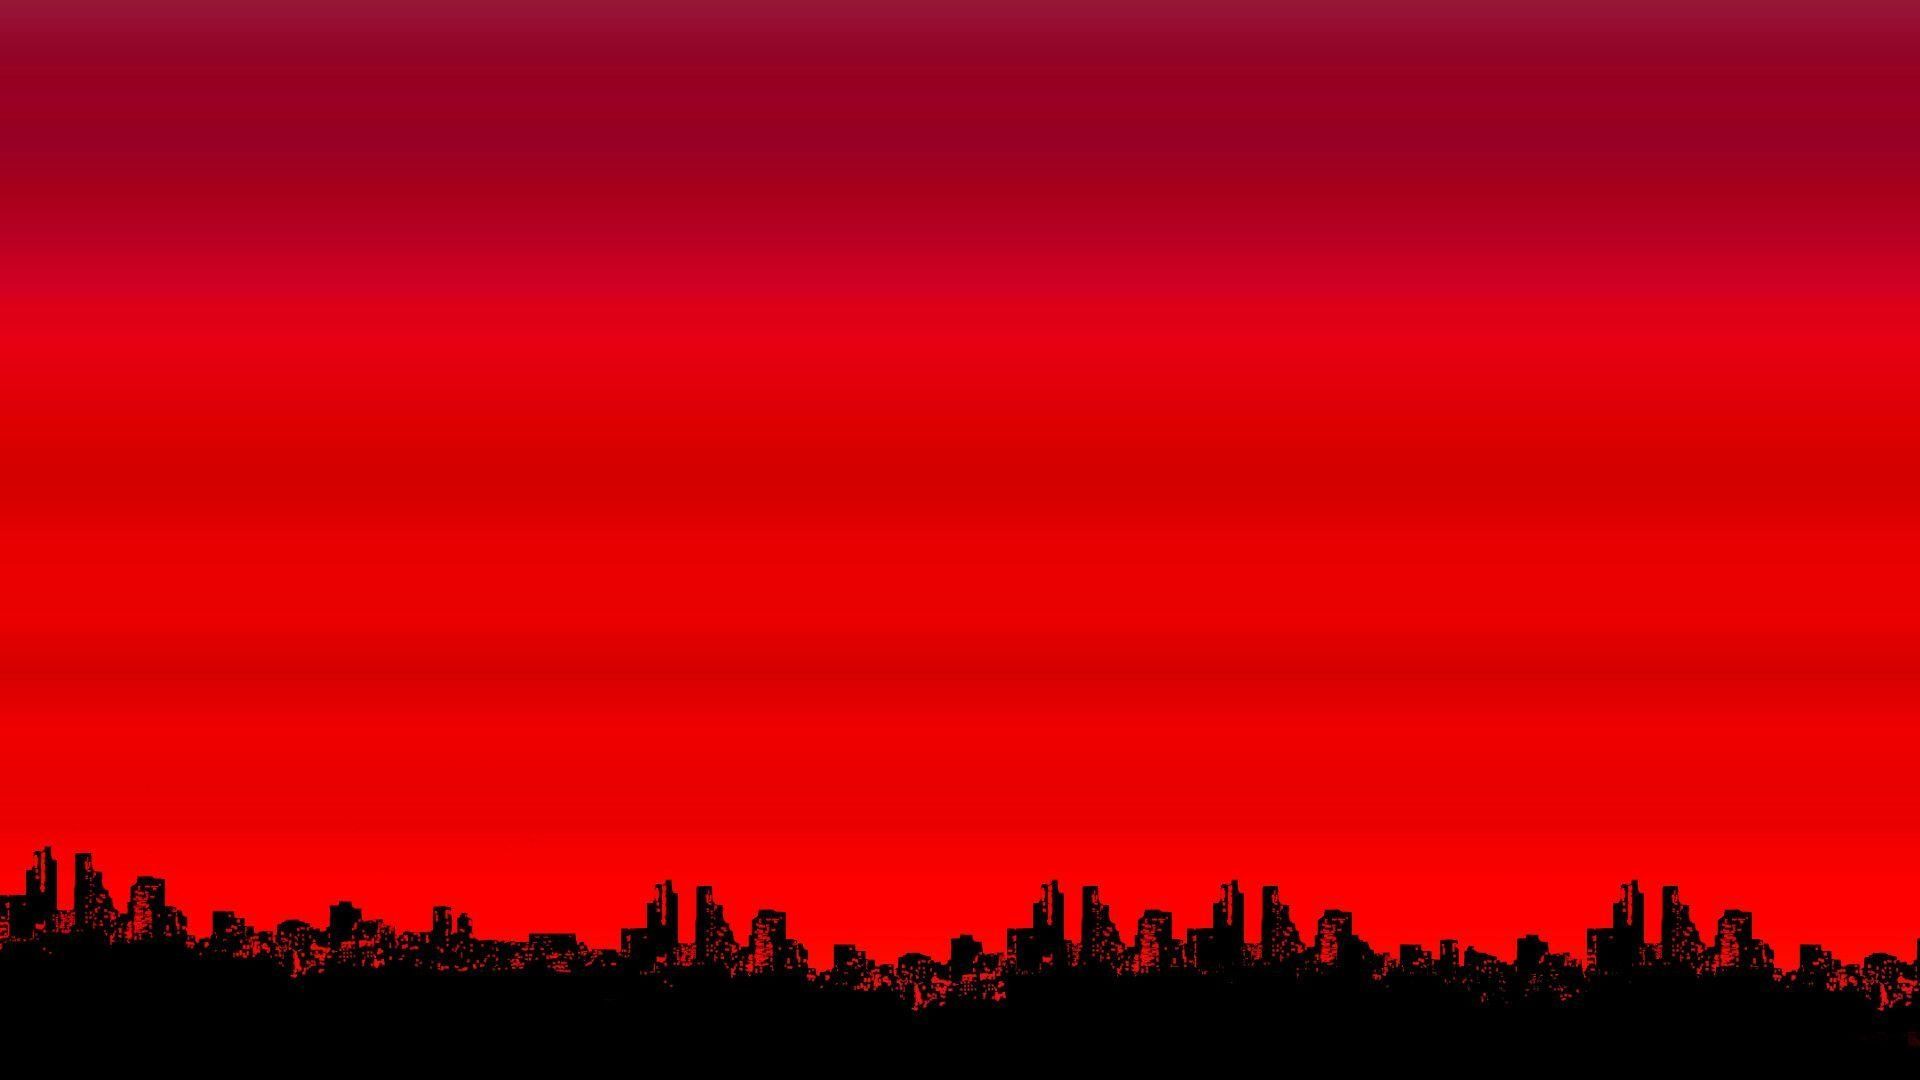 Red and Black Aesthetic Computer Wallpaper